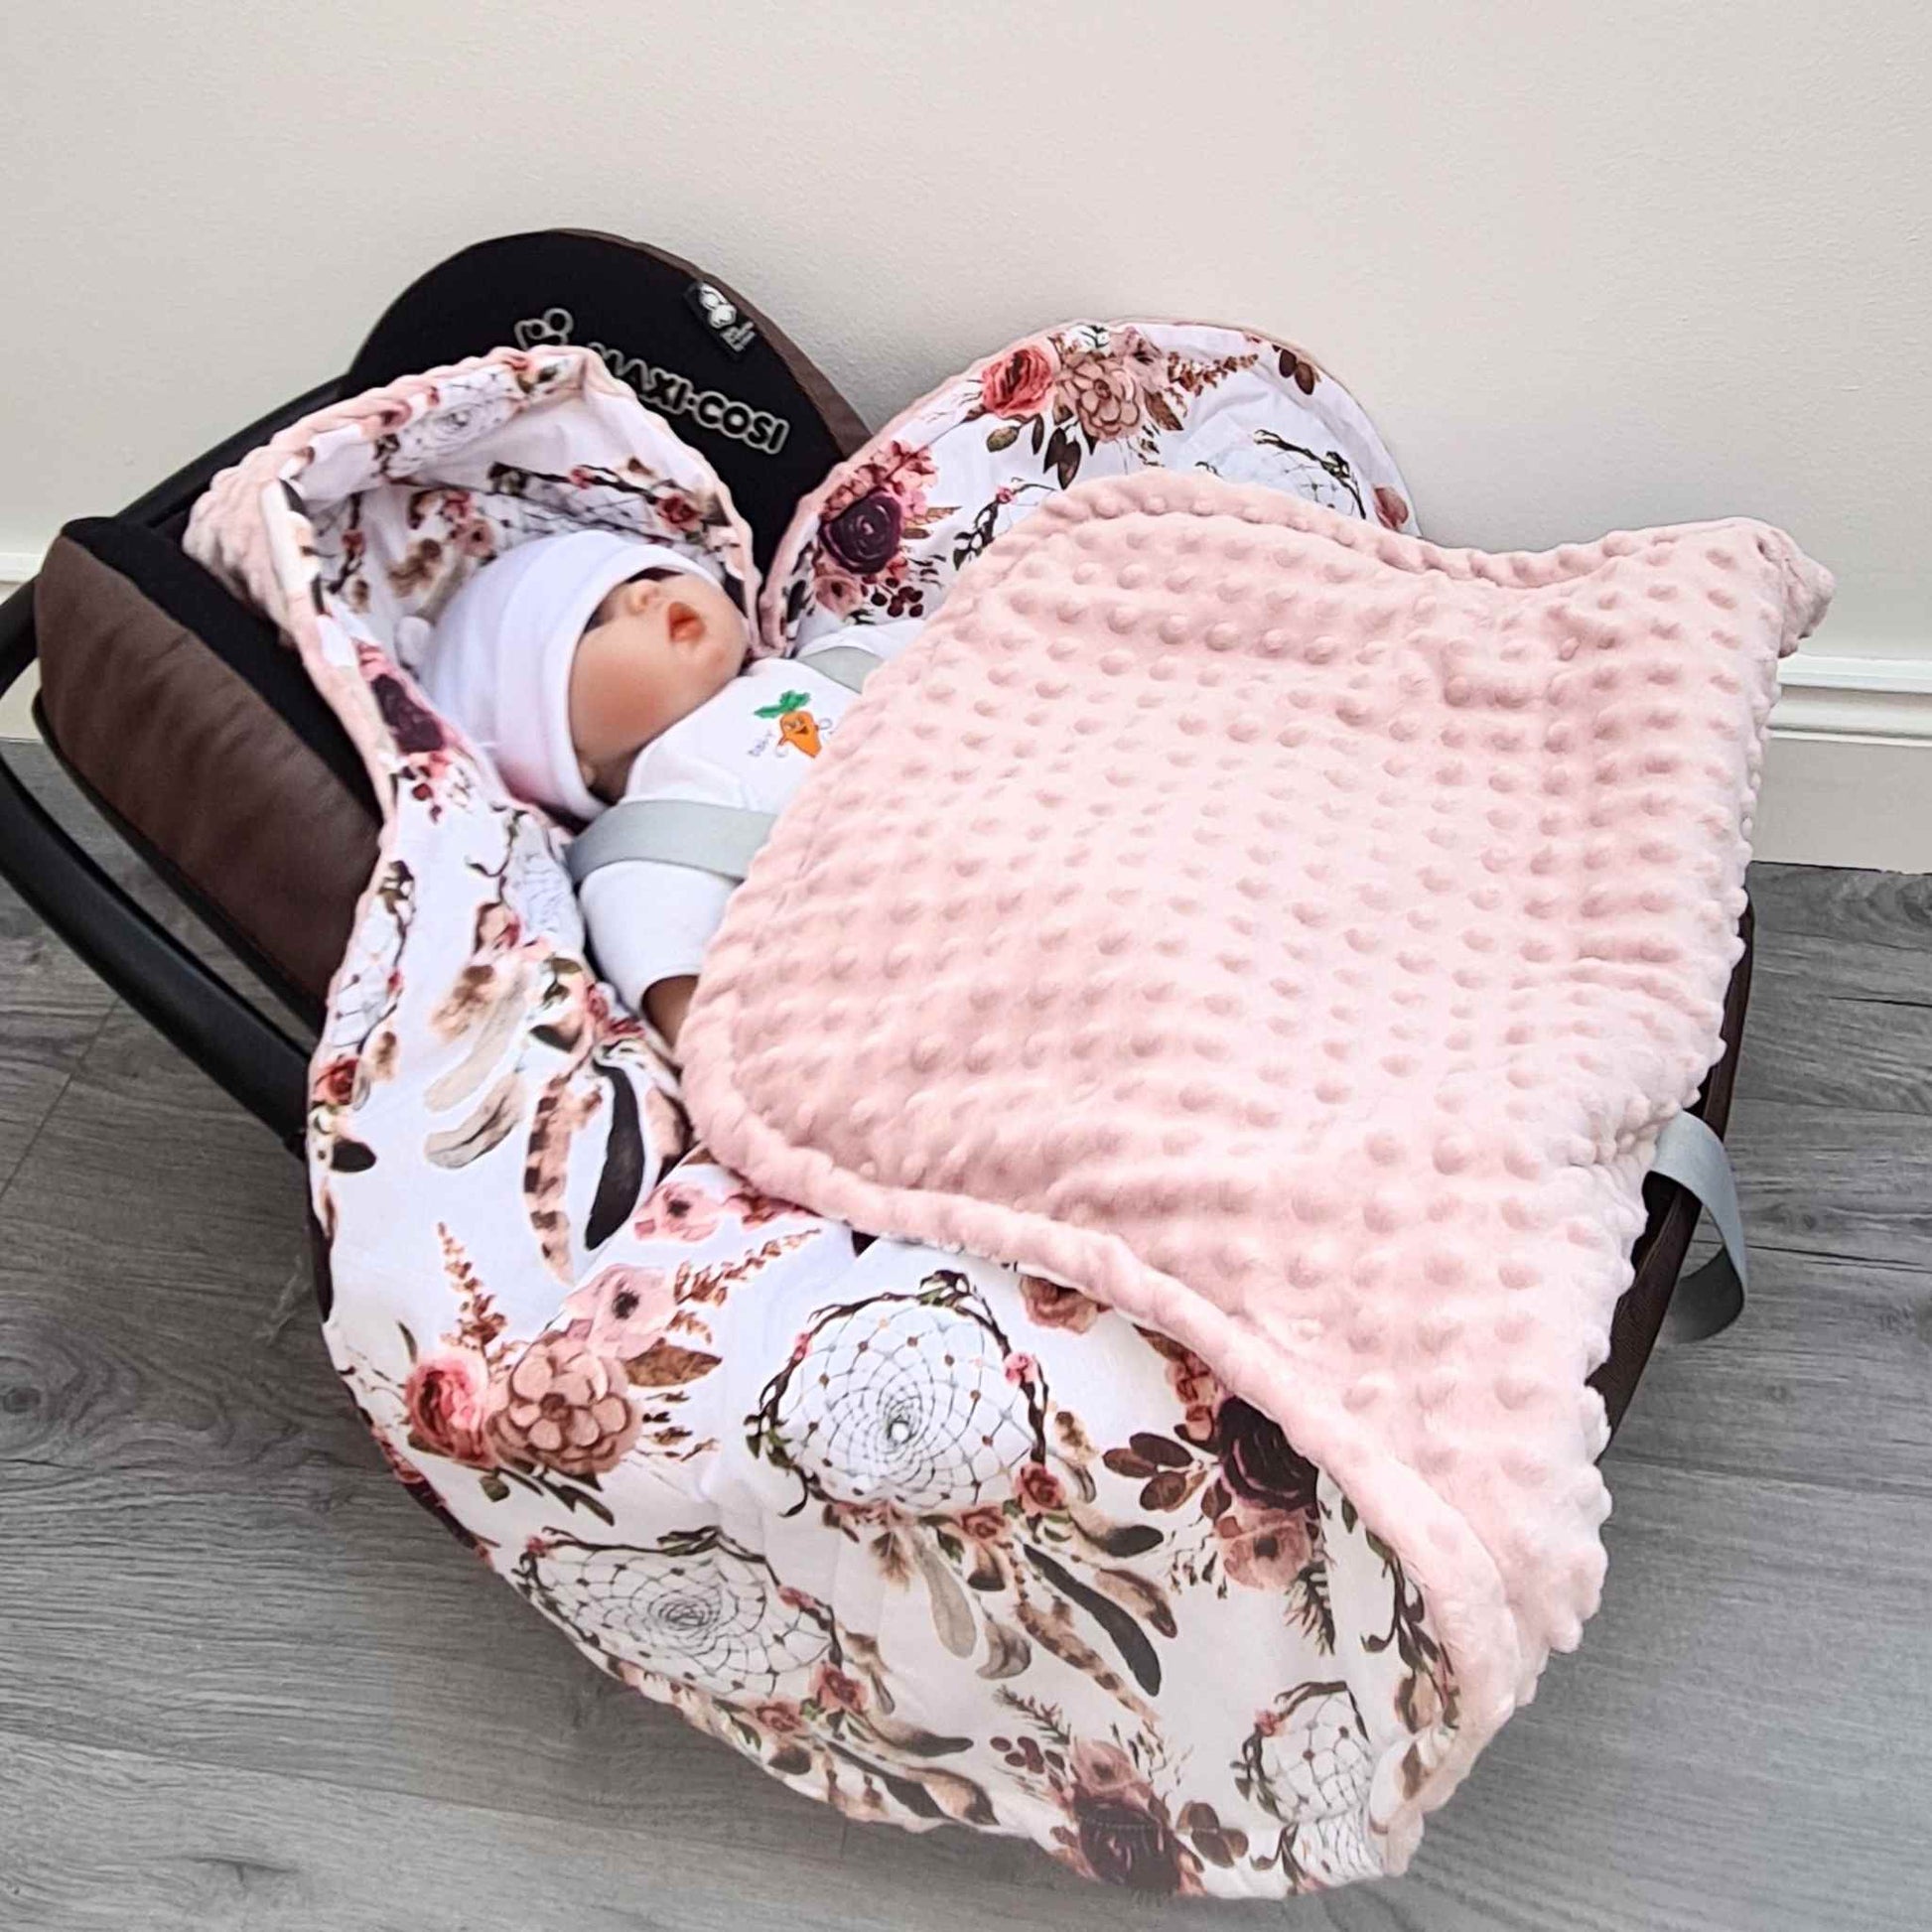 pink blanket for baby car seat from newborn till 12 months 5 points harness evcushy cosy travel blanket